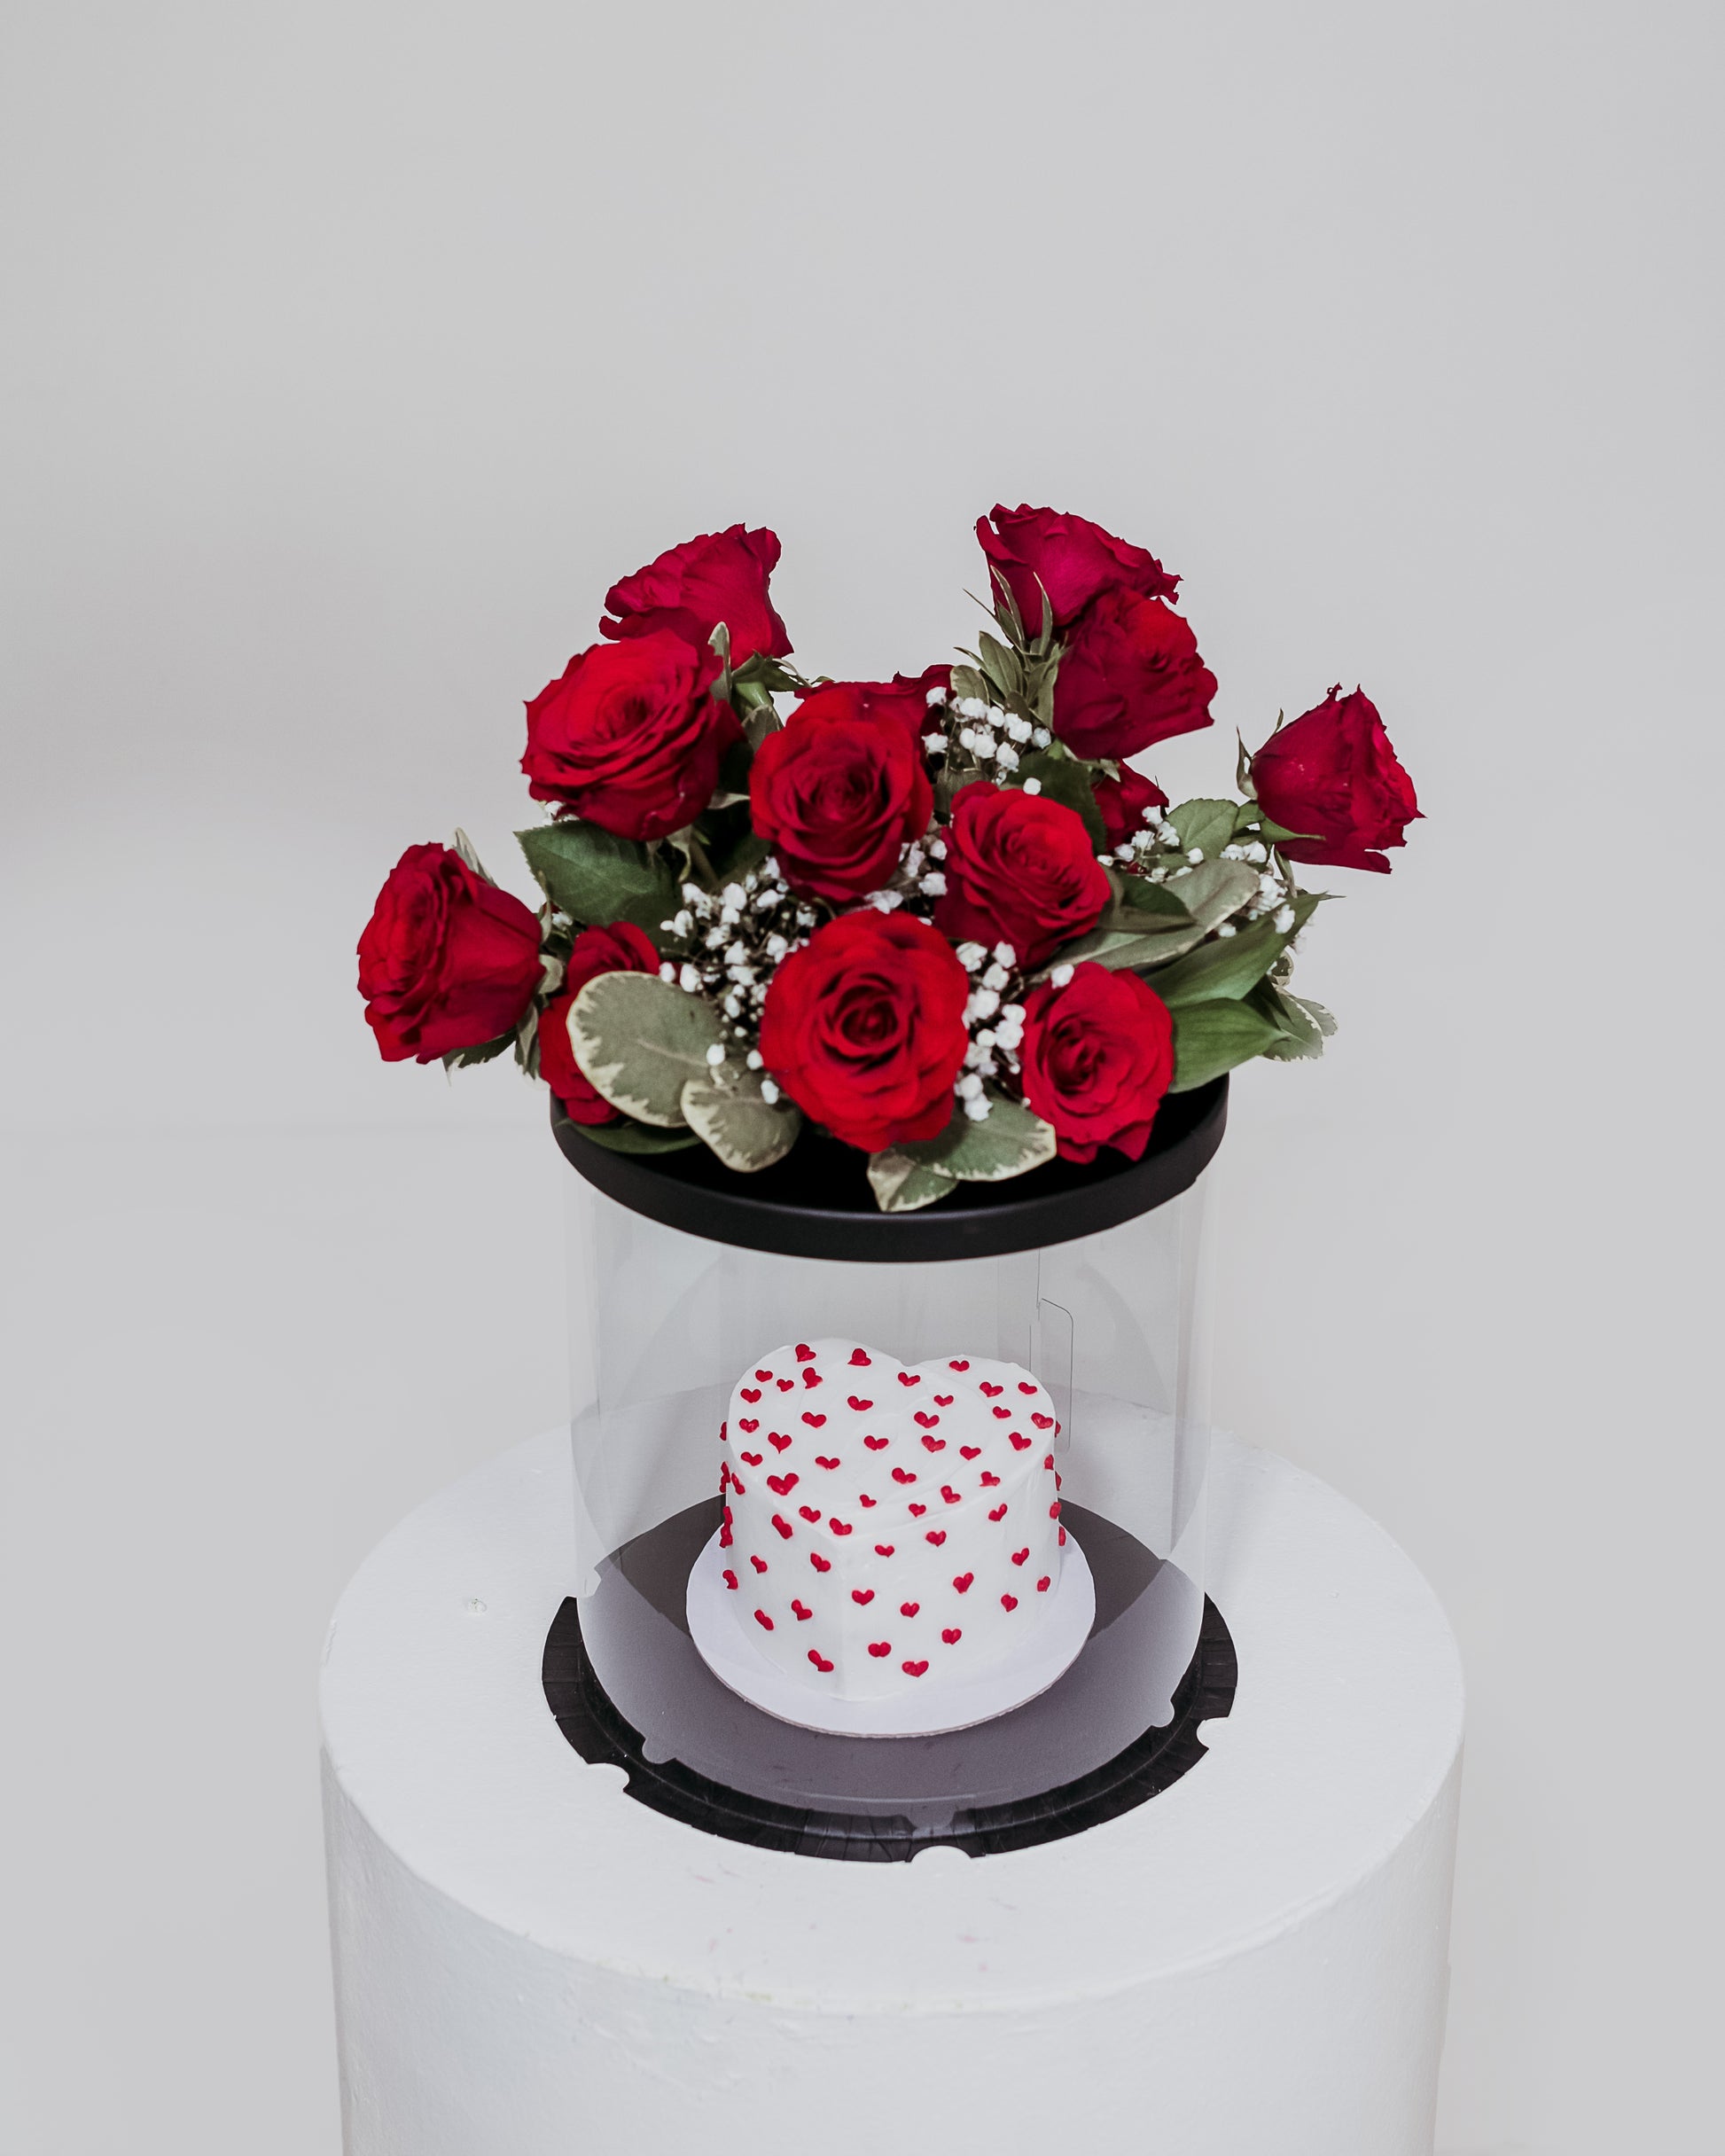 A delightful white Valentine's cake beautifully packaged in a box, accompanied by a lovely arrangement of flowers, a sweet and elegant Valentine's Day present.